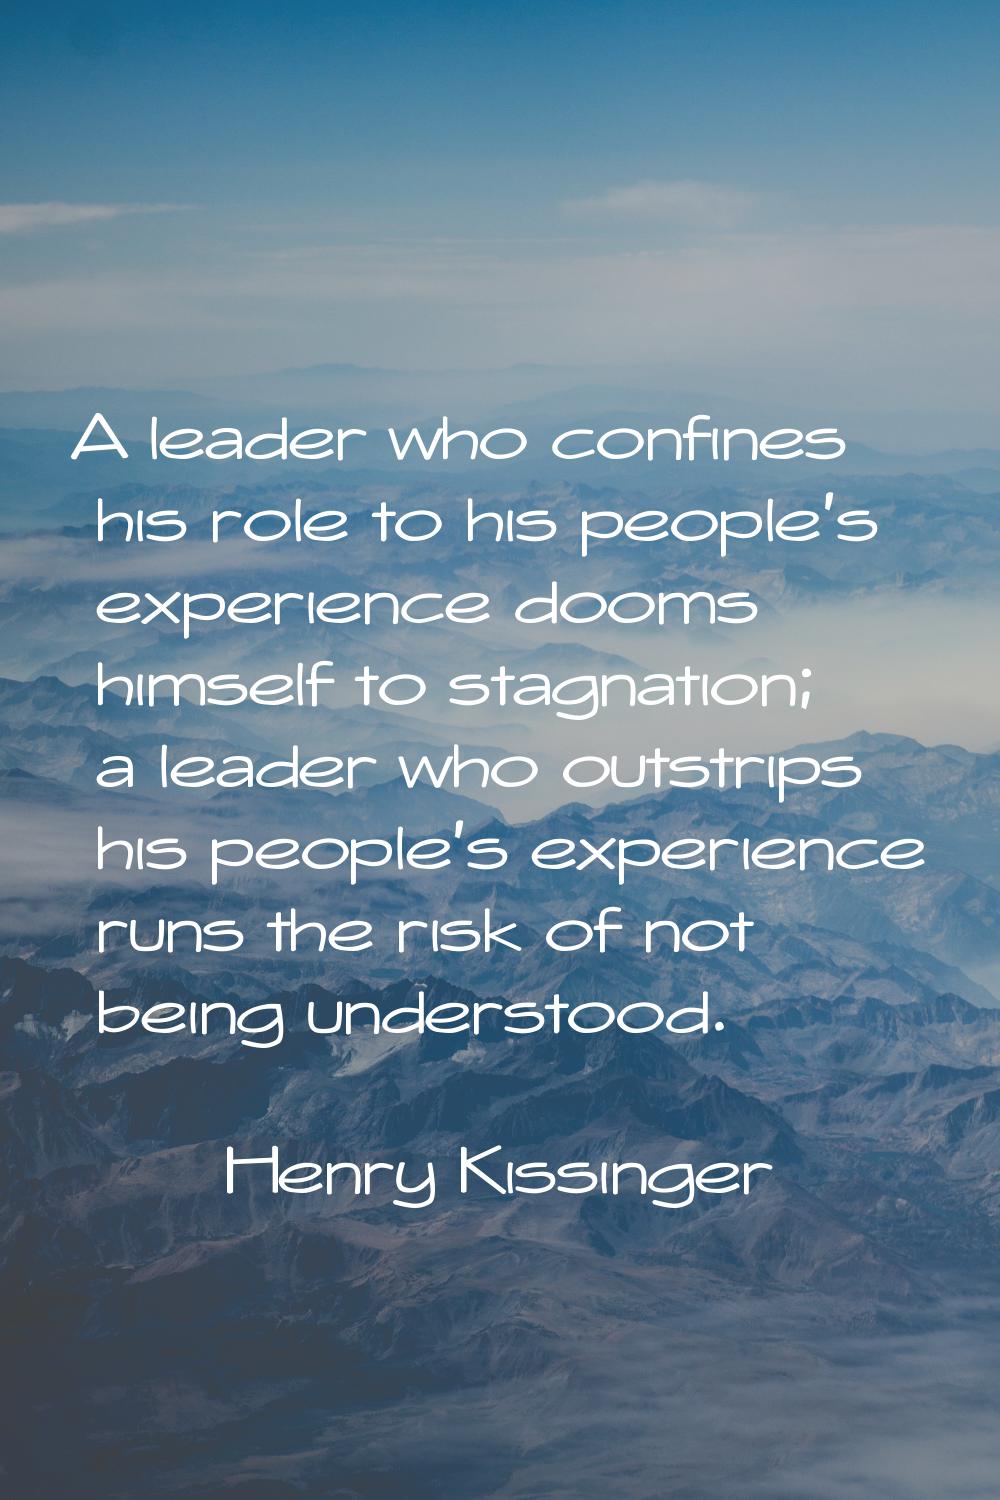 A leader who confines his role to his people's experience dooms himself to stagnation; a leader who